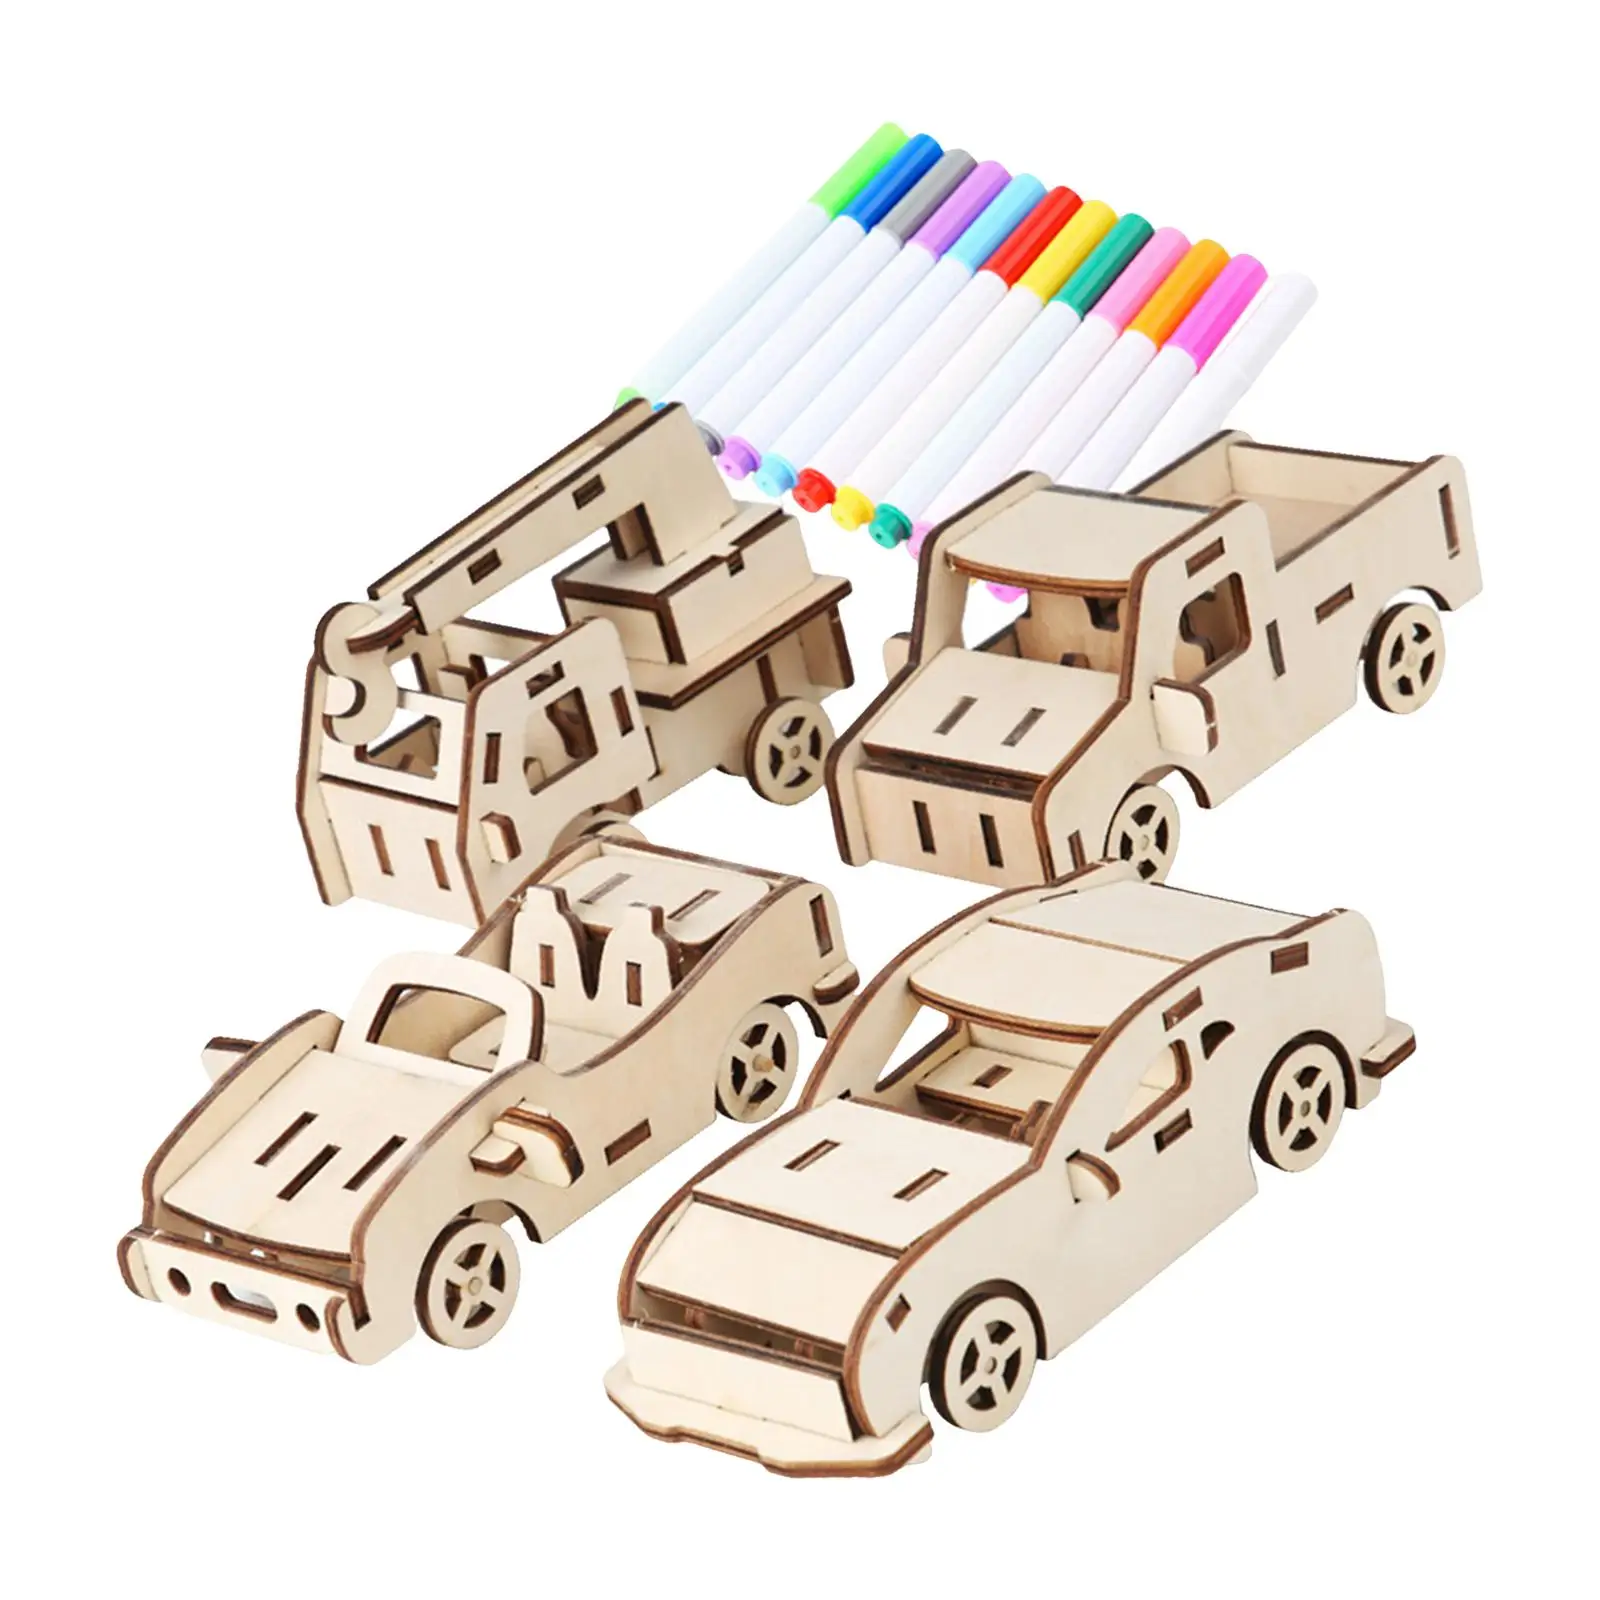 Model Car Kits Unique 4 Pack Jigsaw Wooden DIY Toys for Birthday childrens Party